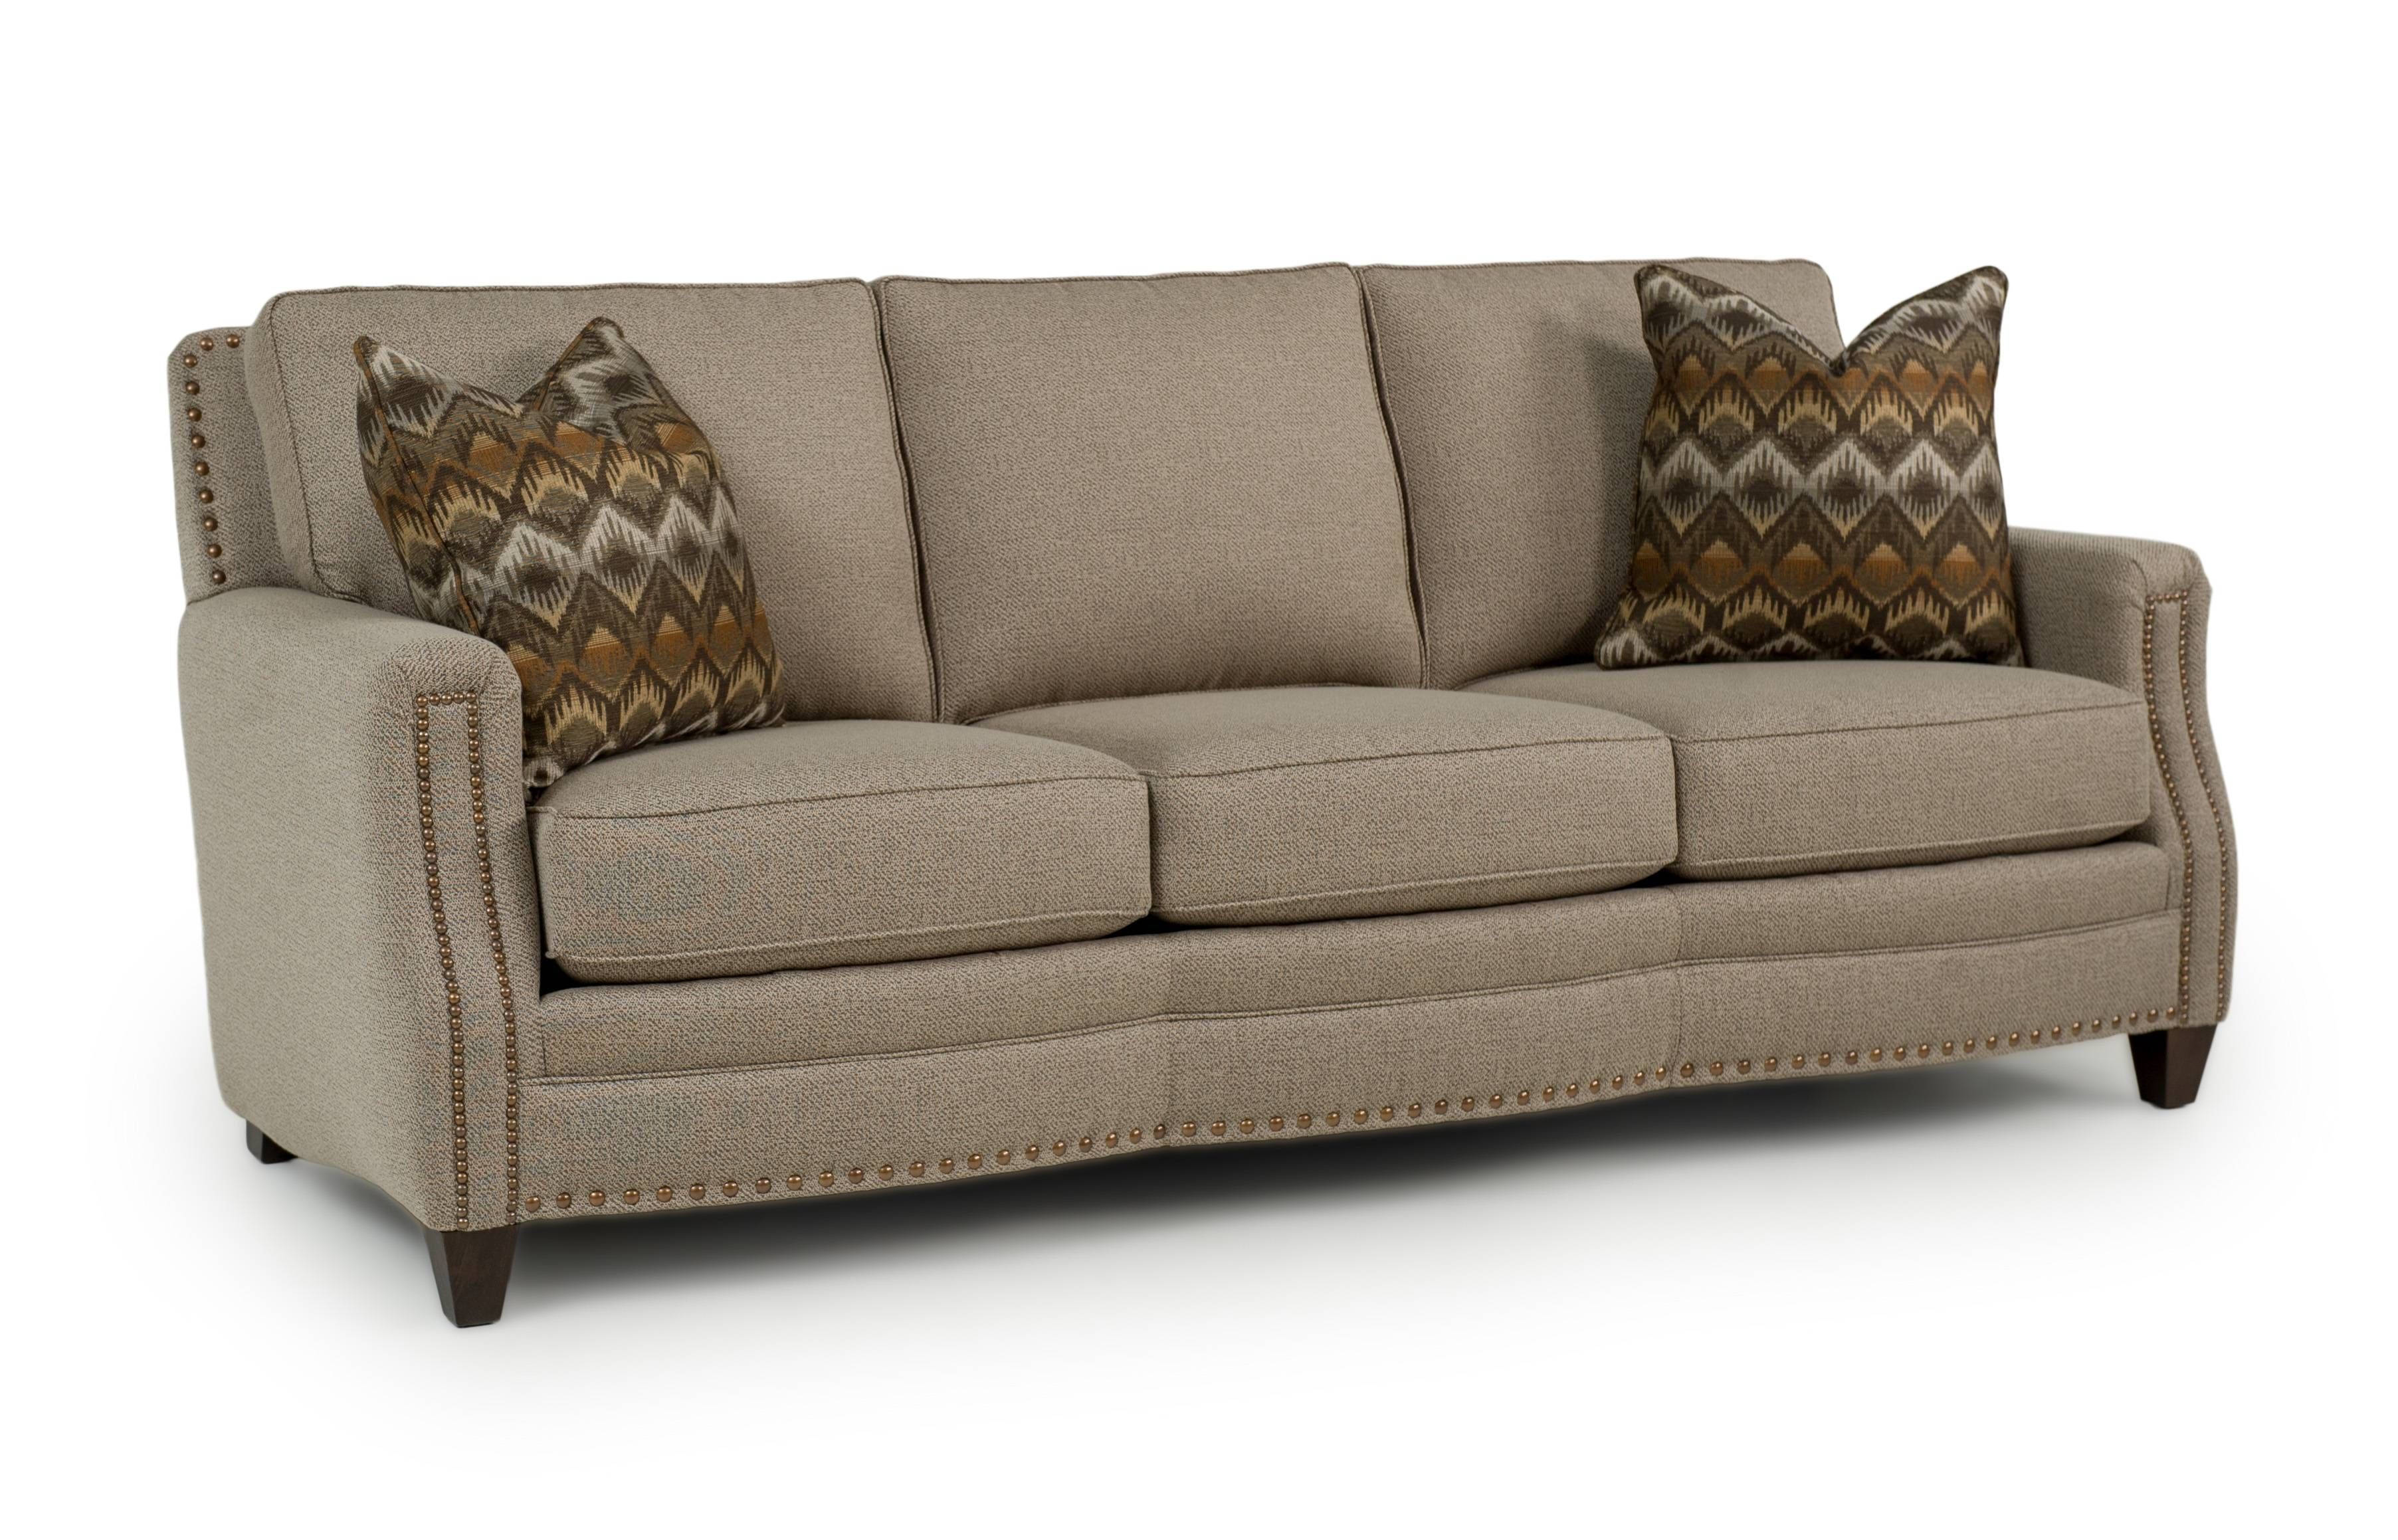 Living Room Furniture | Saugerties Furniture Intended For Smith Brothers Sofas (View 5 of 15)